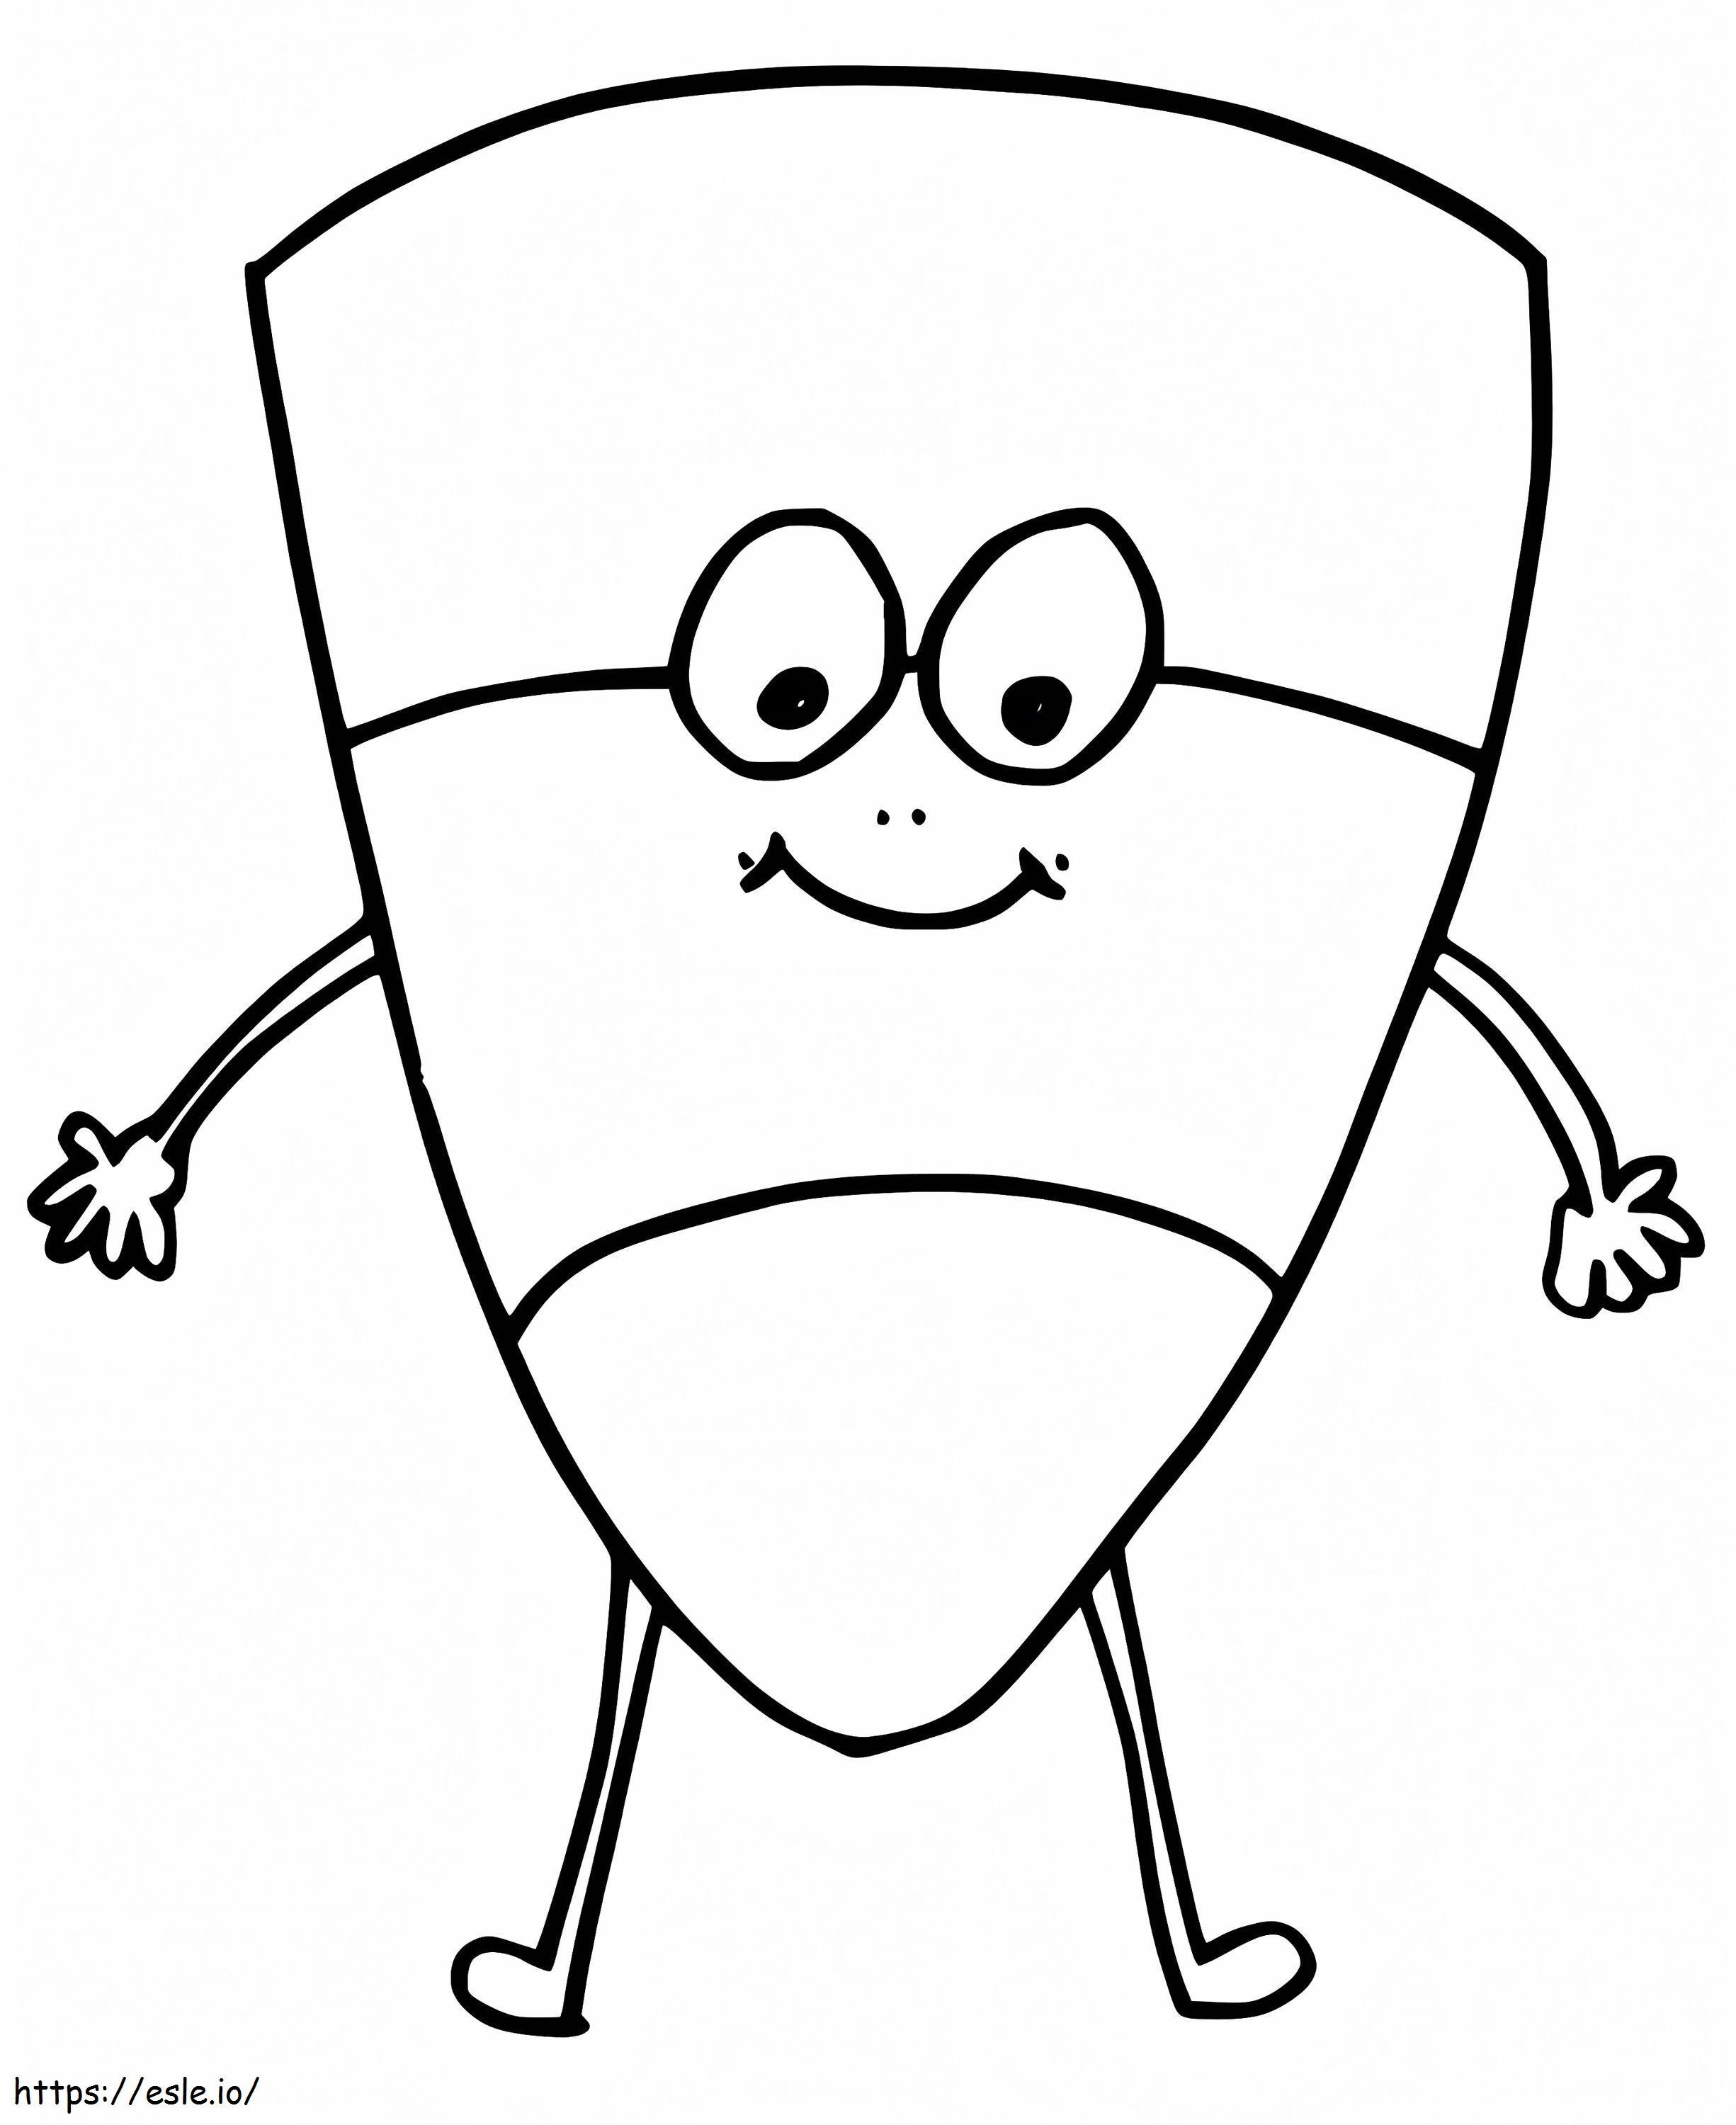 Cartoon Candy Corn coloring page